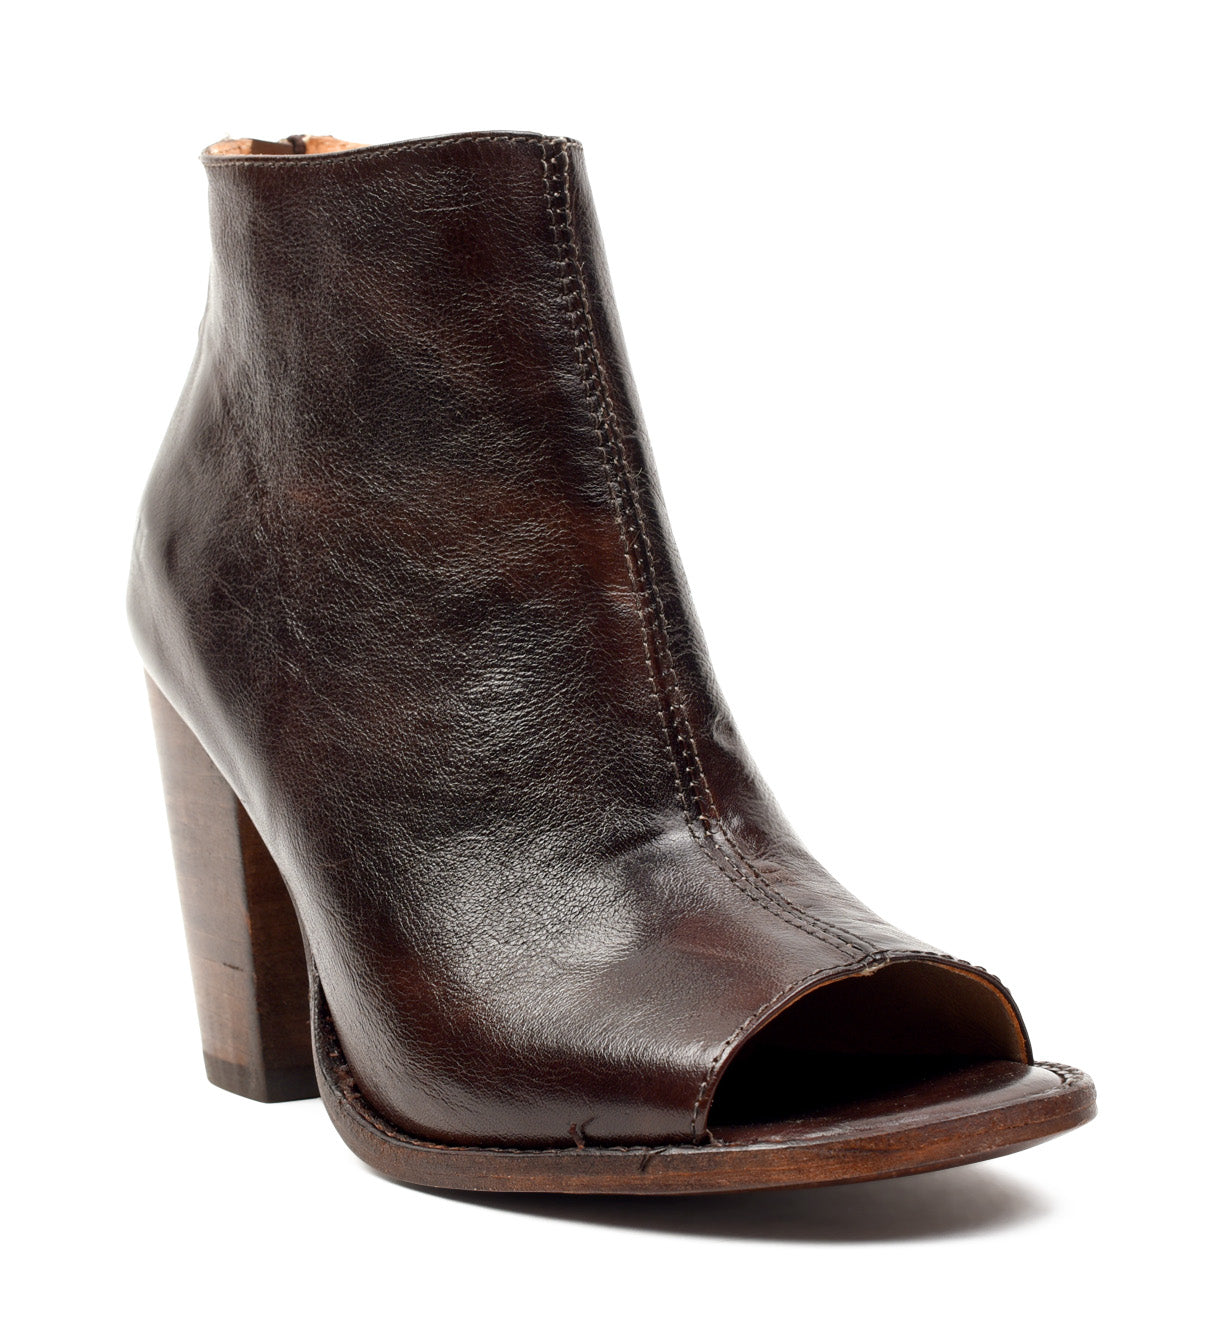 A brown leather Onset peep toe boot with a wooden heel by Bed Stu.